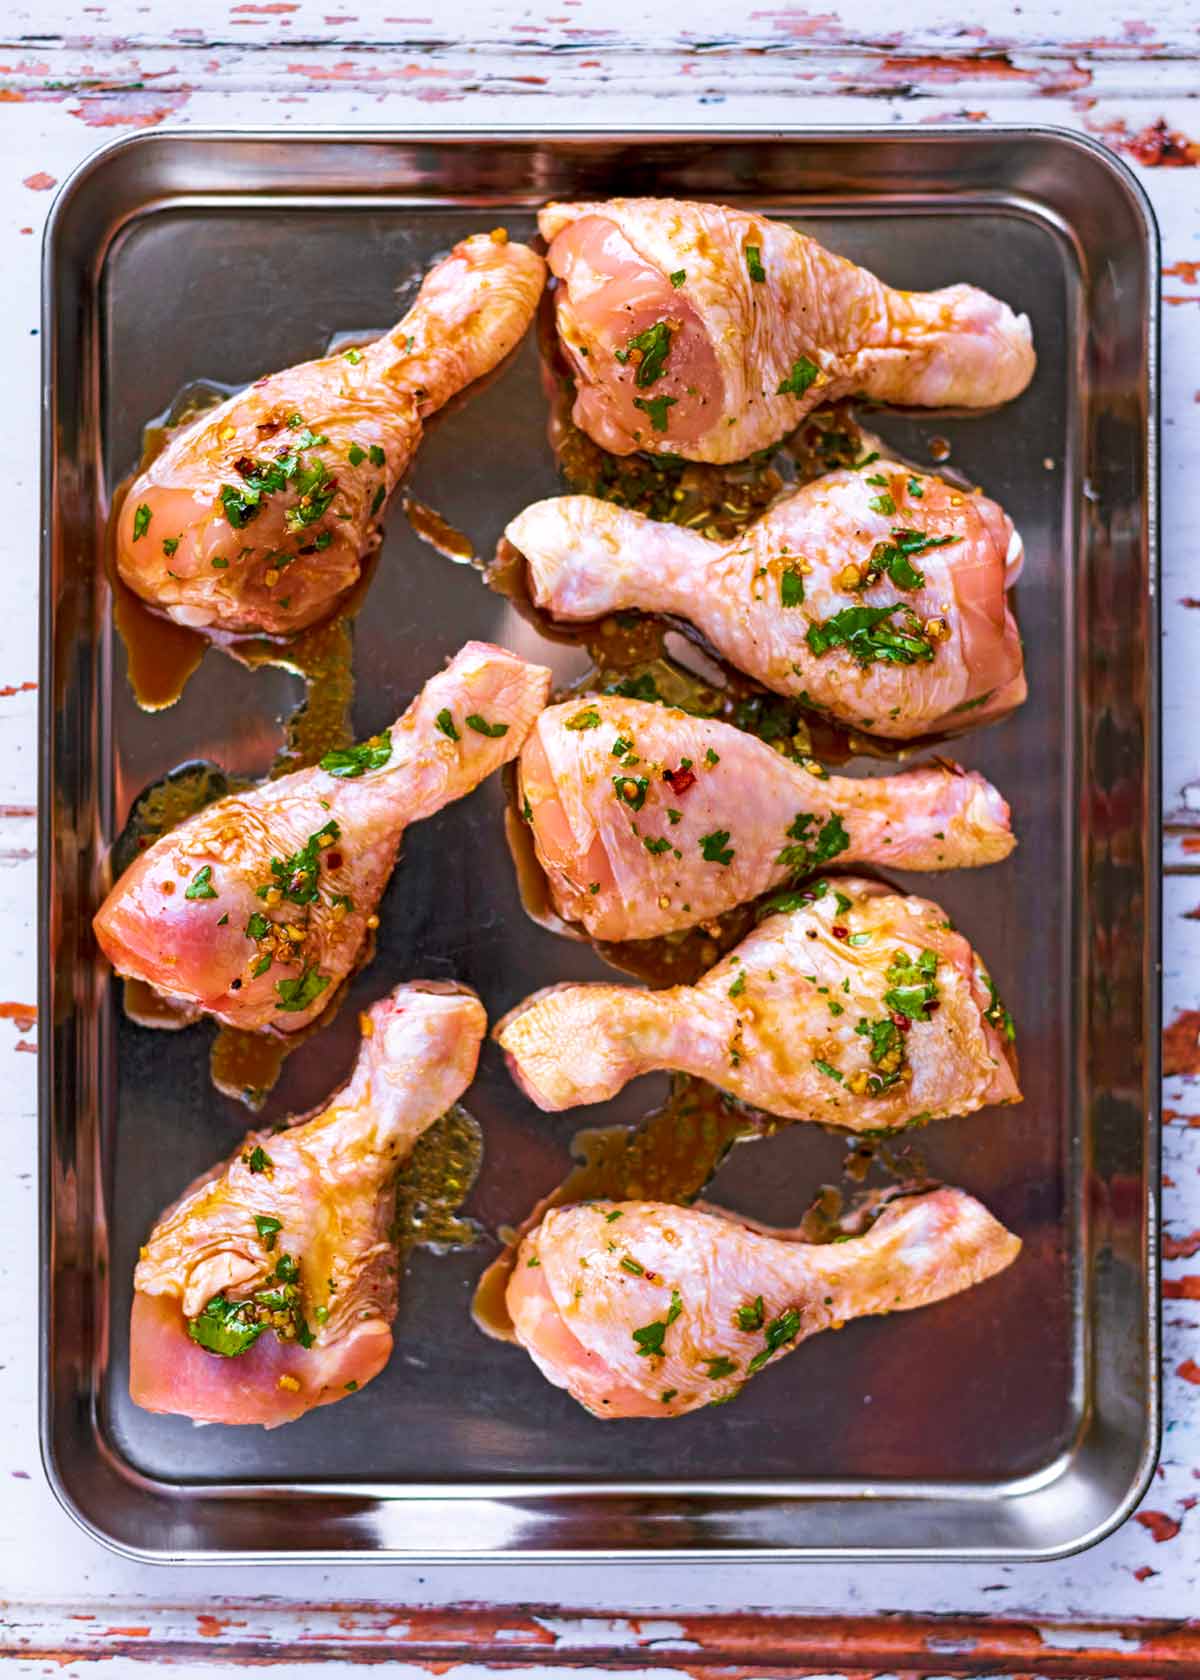 Eight marinated chicken drumsticks on a baking tray.